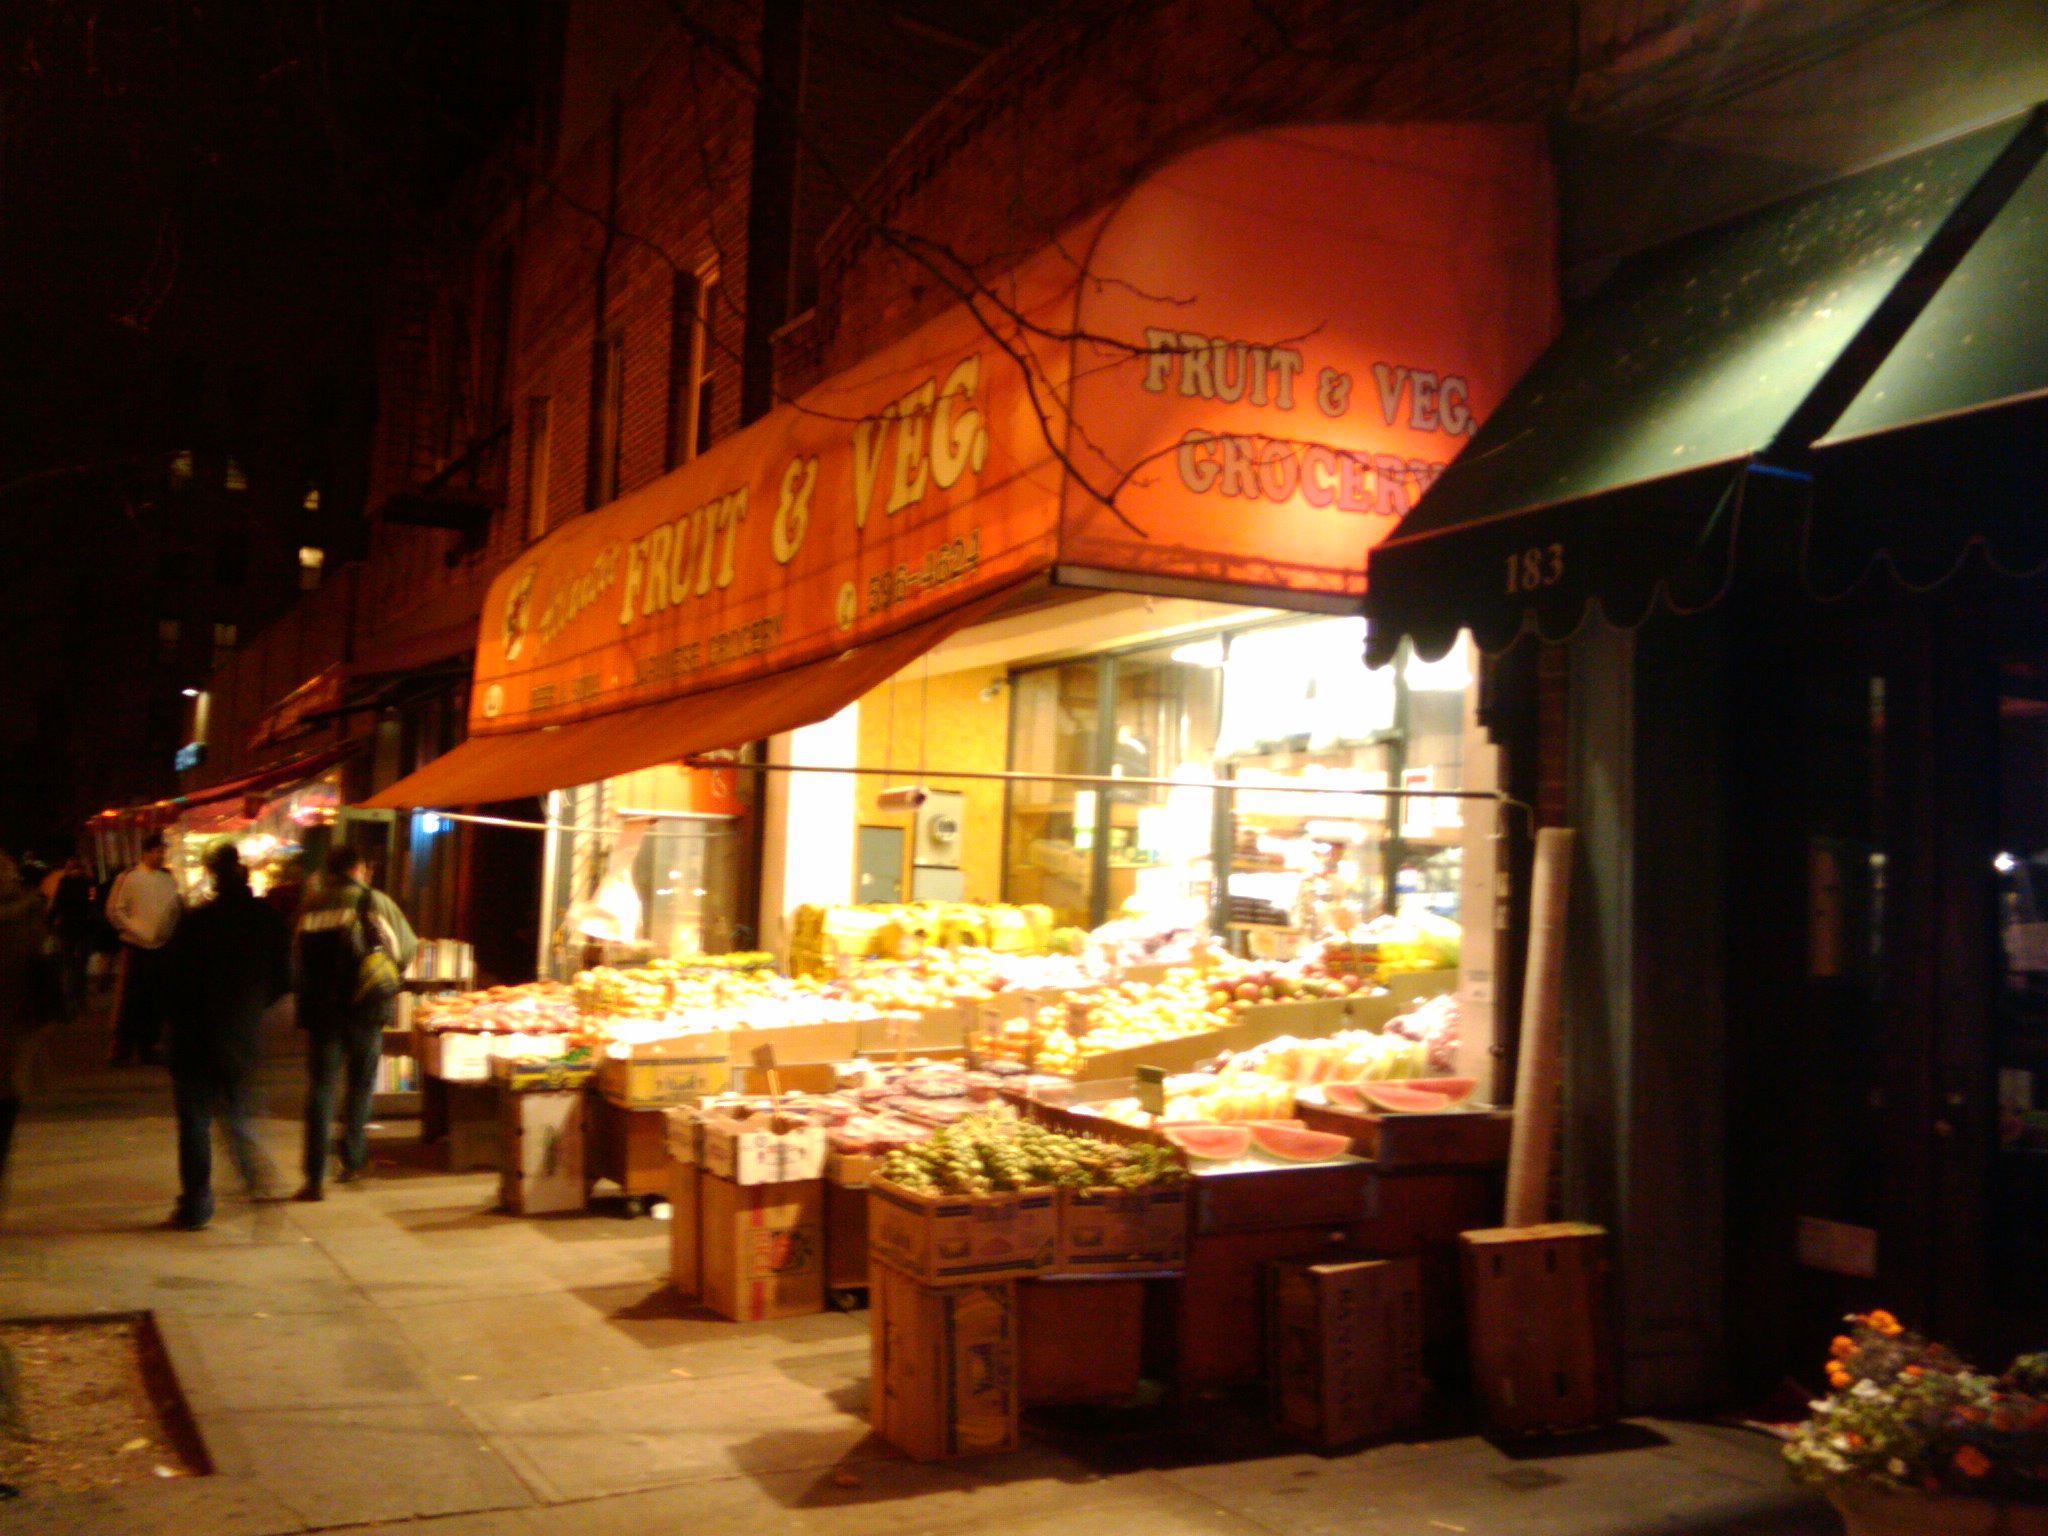 there is a fruit and veg market on the street